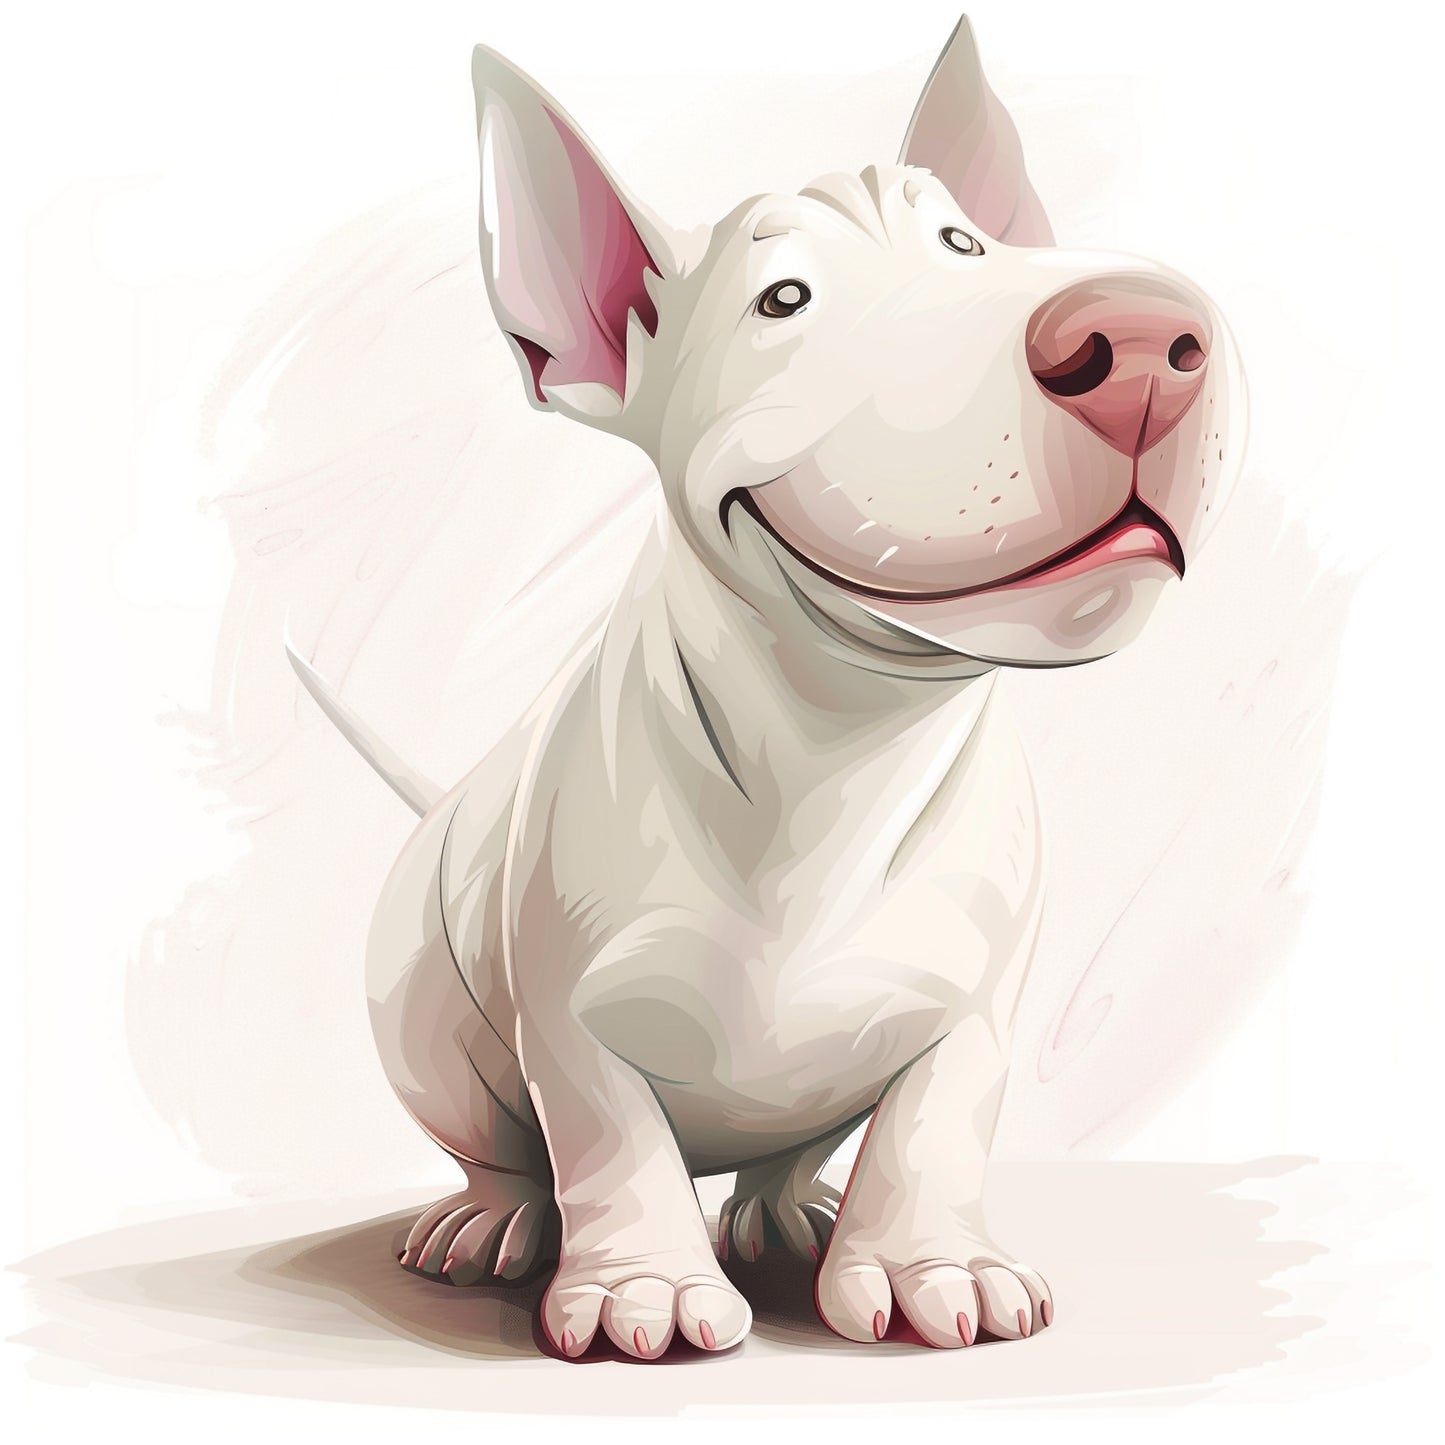 Adorable Bull Terrier Dog with a Friendly Smile